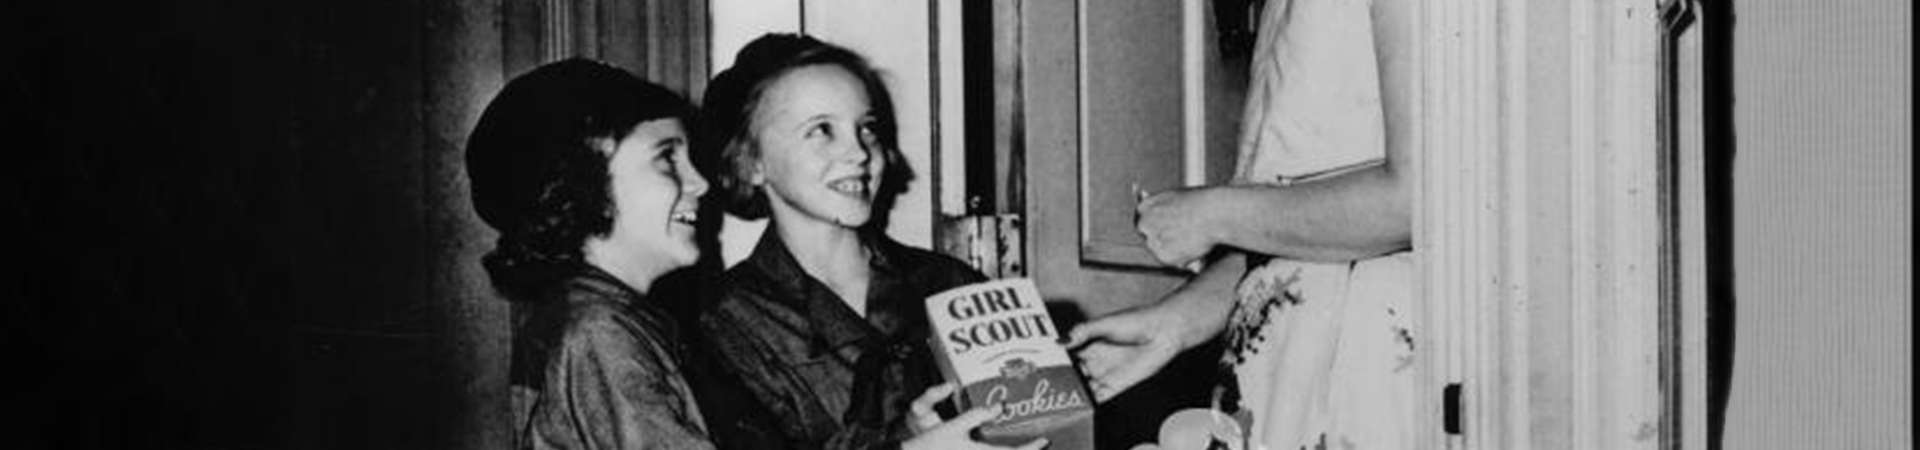 Girl Scout Cookie History | Girl Scouts